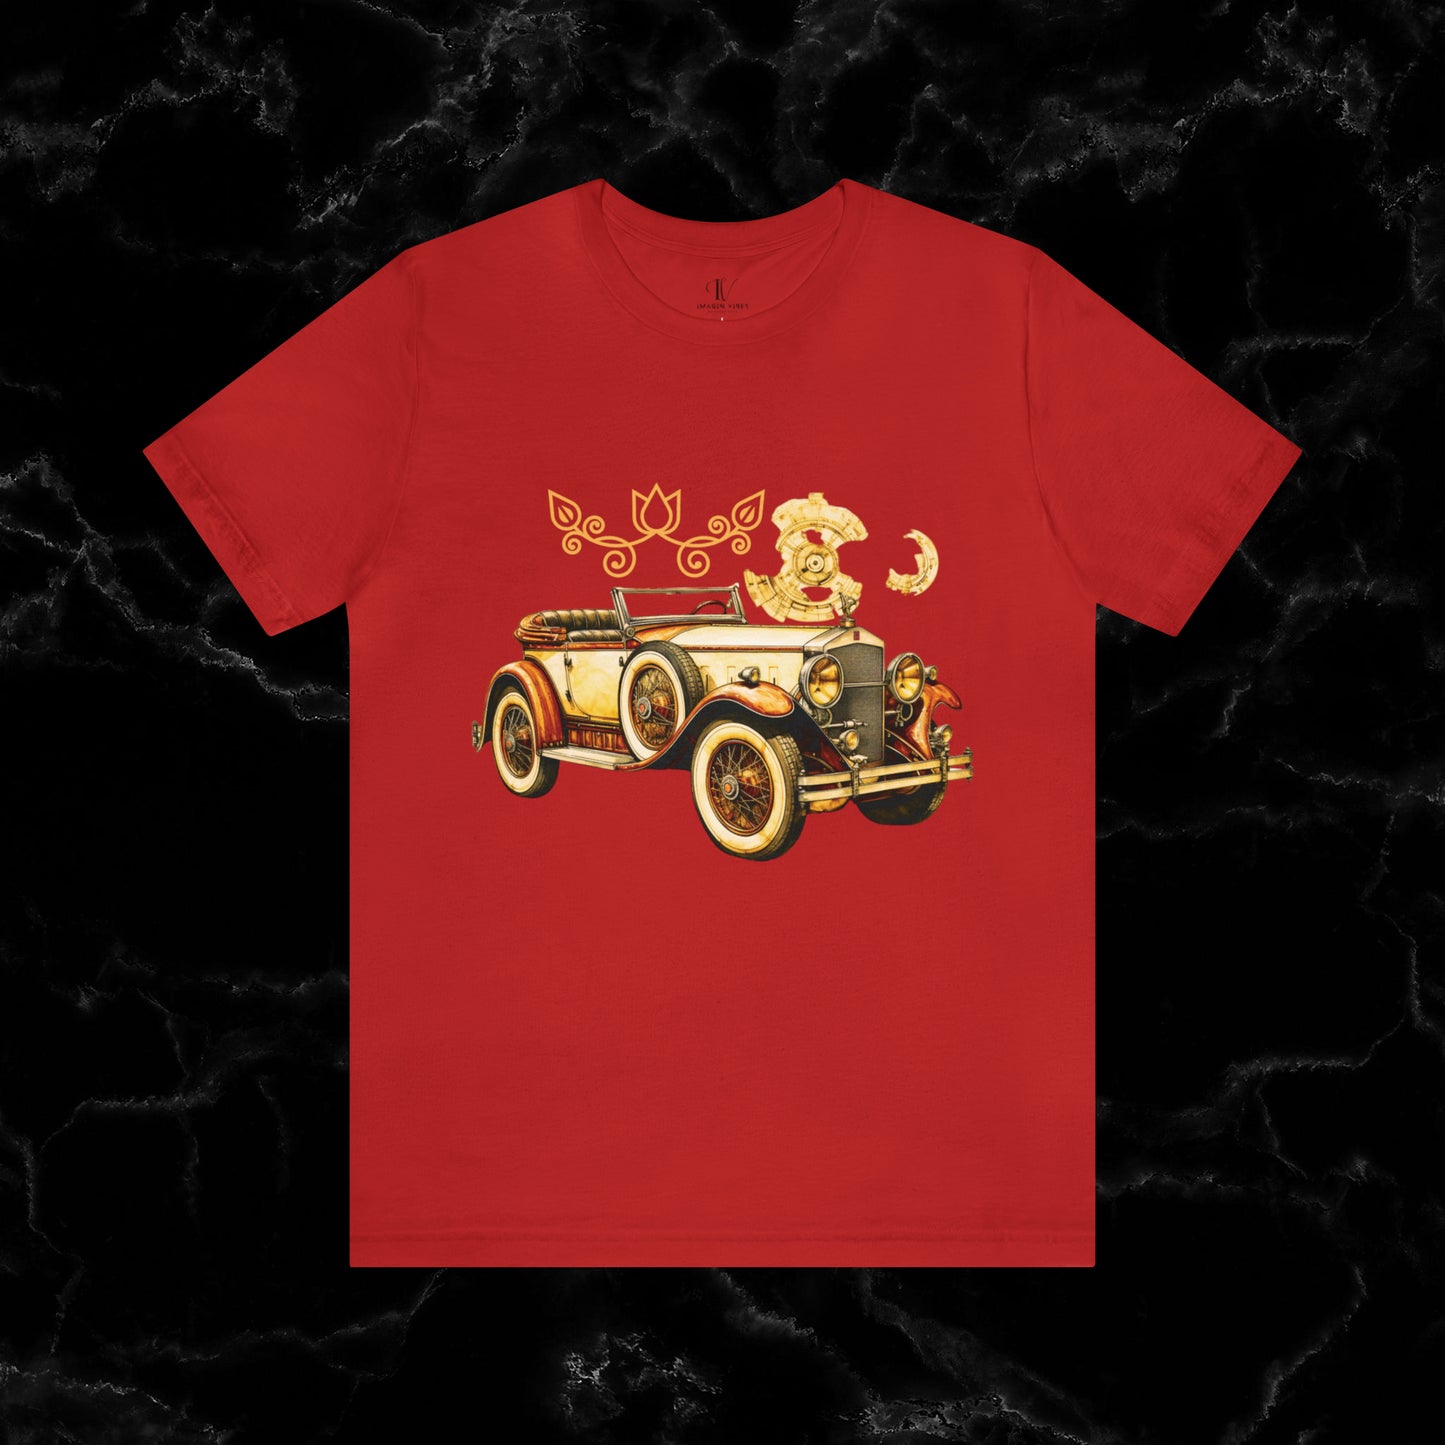 Vintage Car Enthusiast T-Shirt - Classic Wheels and Timeless Appeal for Automotive Enthusiast T-Shirt Red S 